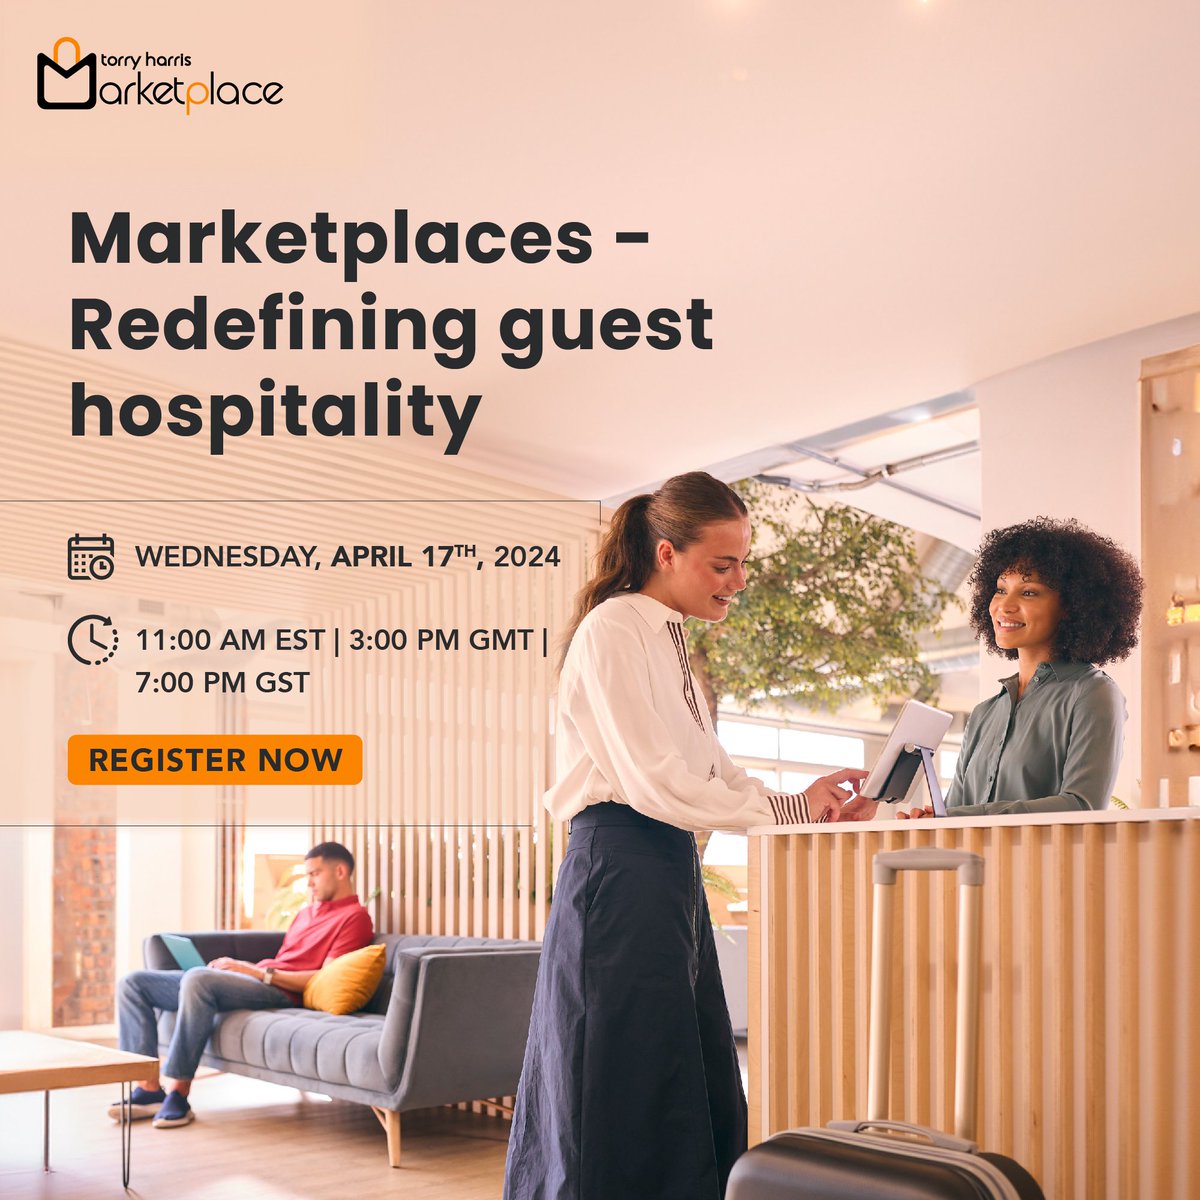 Learn how a digital marketplace can change the hospitality industry, empower operators, and create new revenue streams by building a partner network and enhancing guest experience. Register for our live webinar now!

torryharrisproducts.com/webinar/digita…

#hospitality #HospitalityIndustry